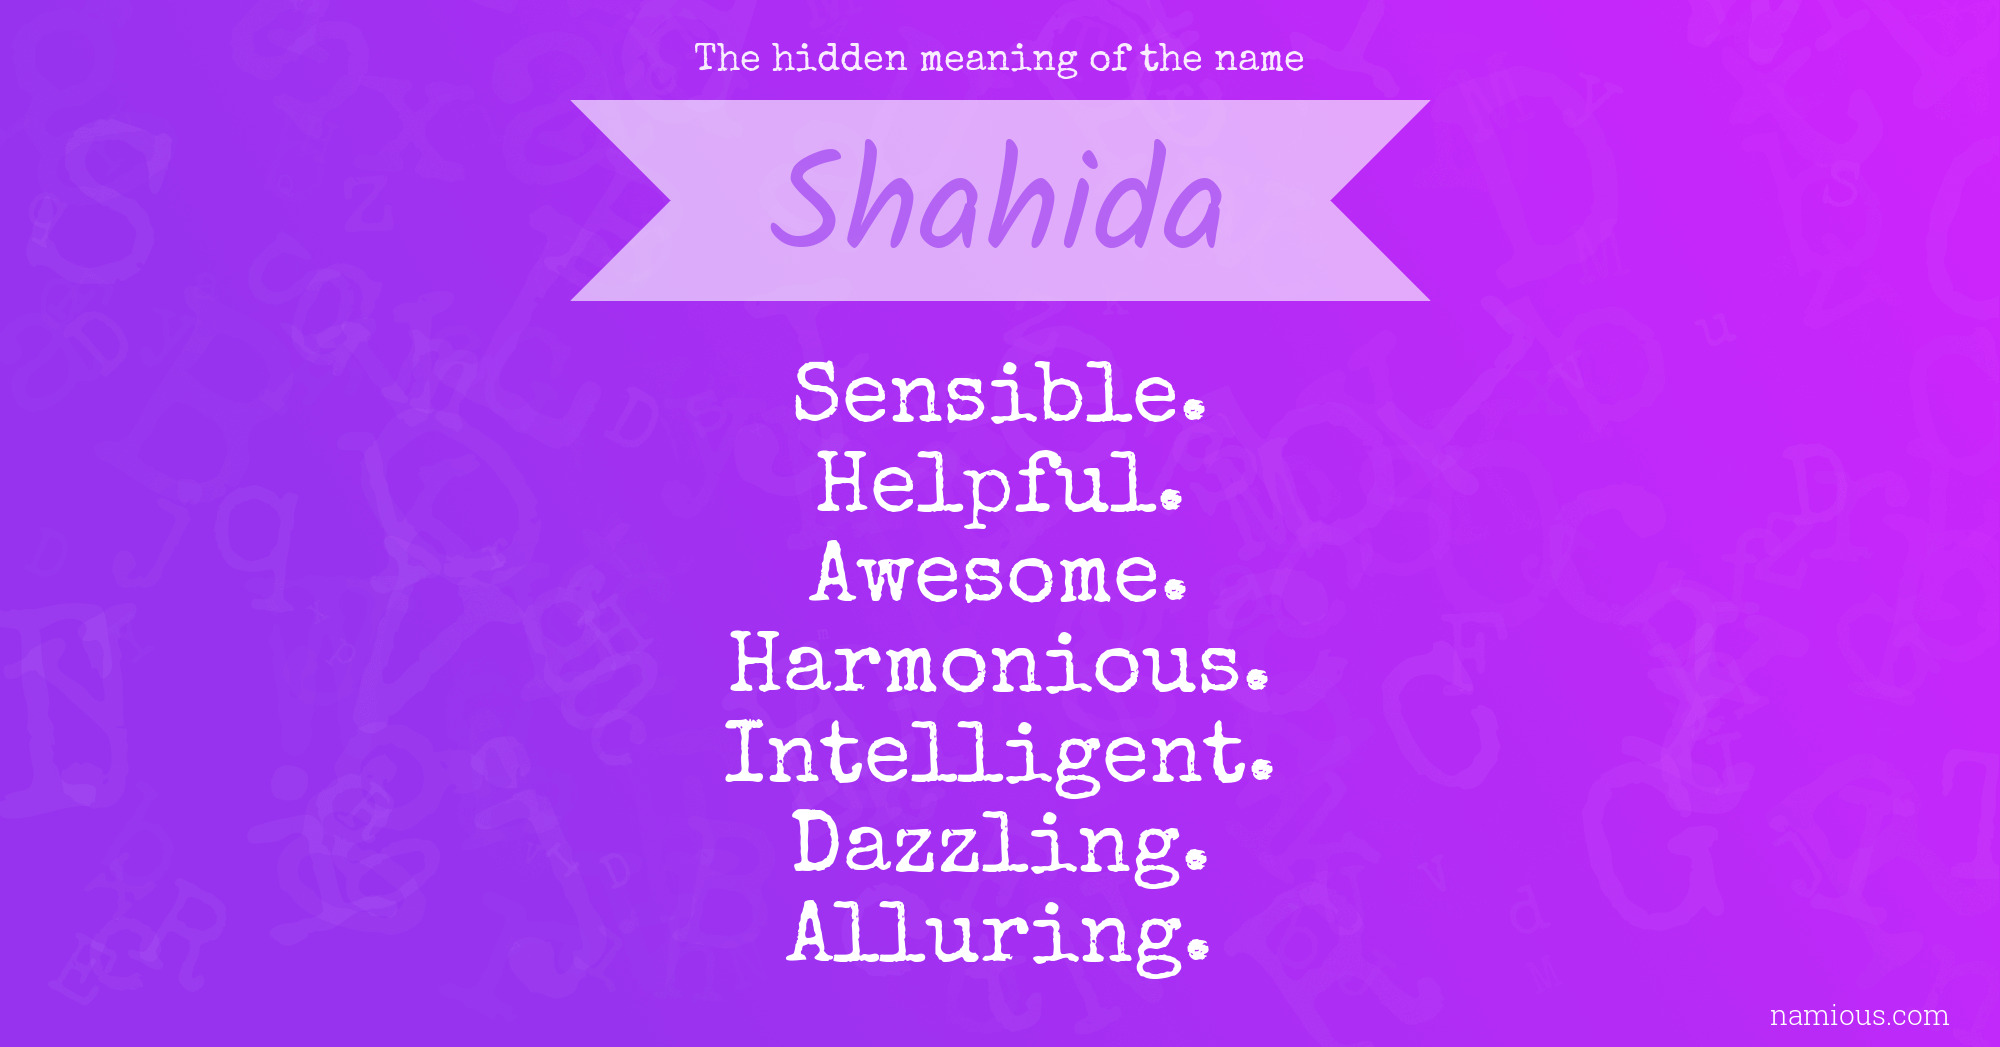 The hidden meaning of the name Shahida